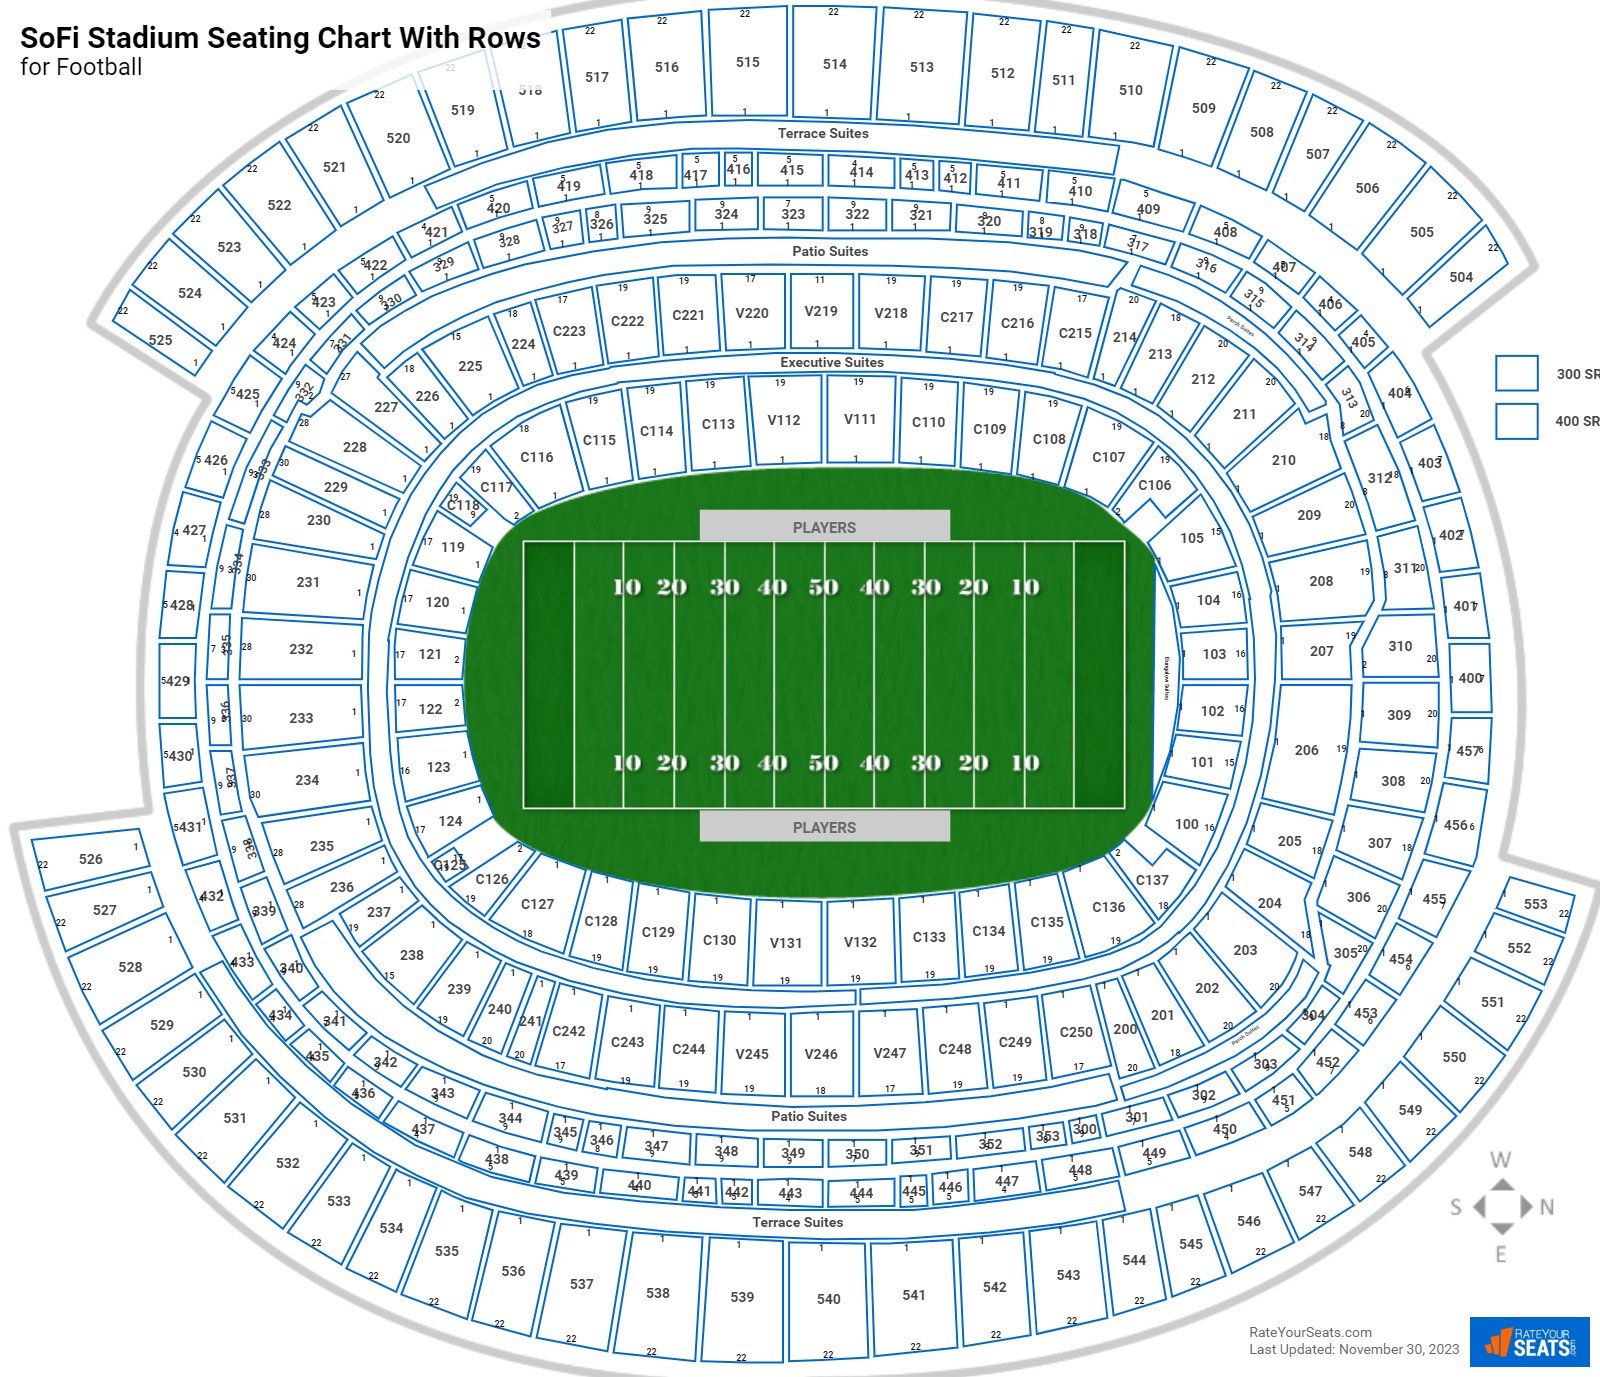 Sofi Stadium Seating Chart With Rows For Football 